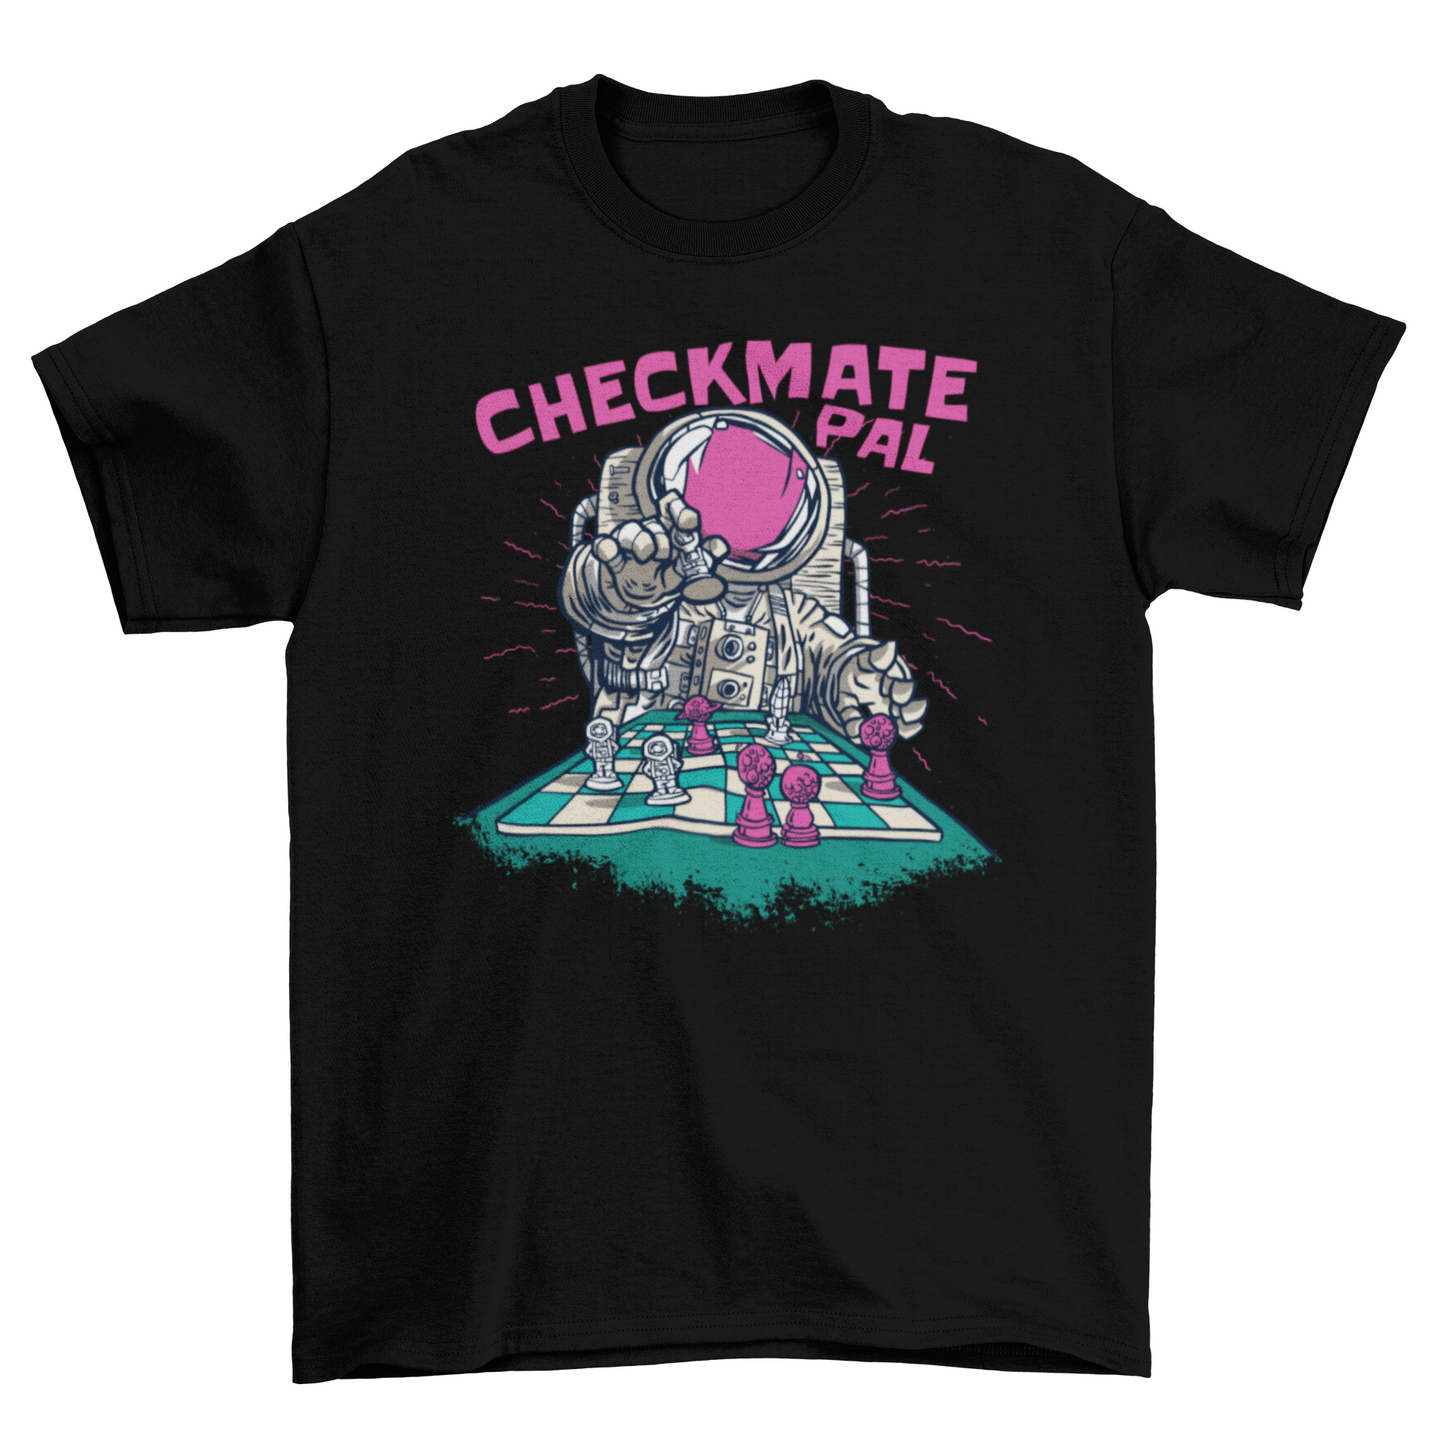 Checkmate astronaut chess t-shirt